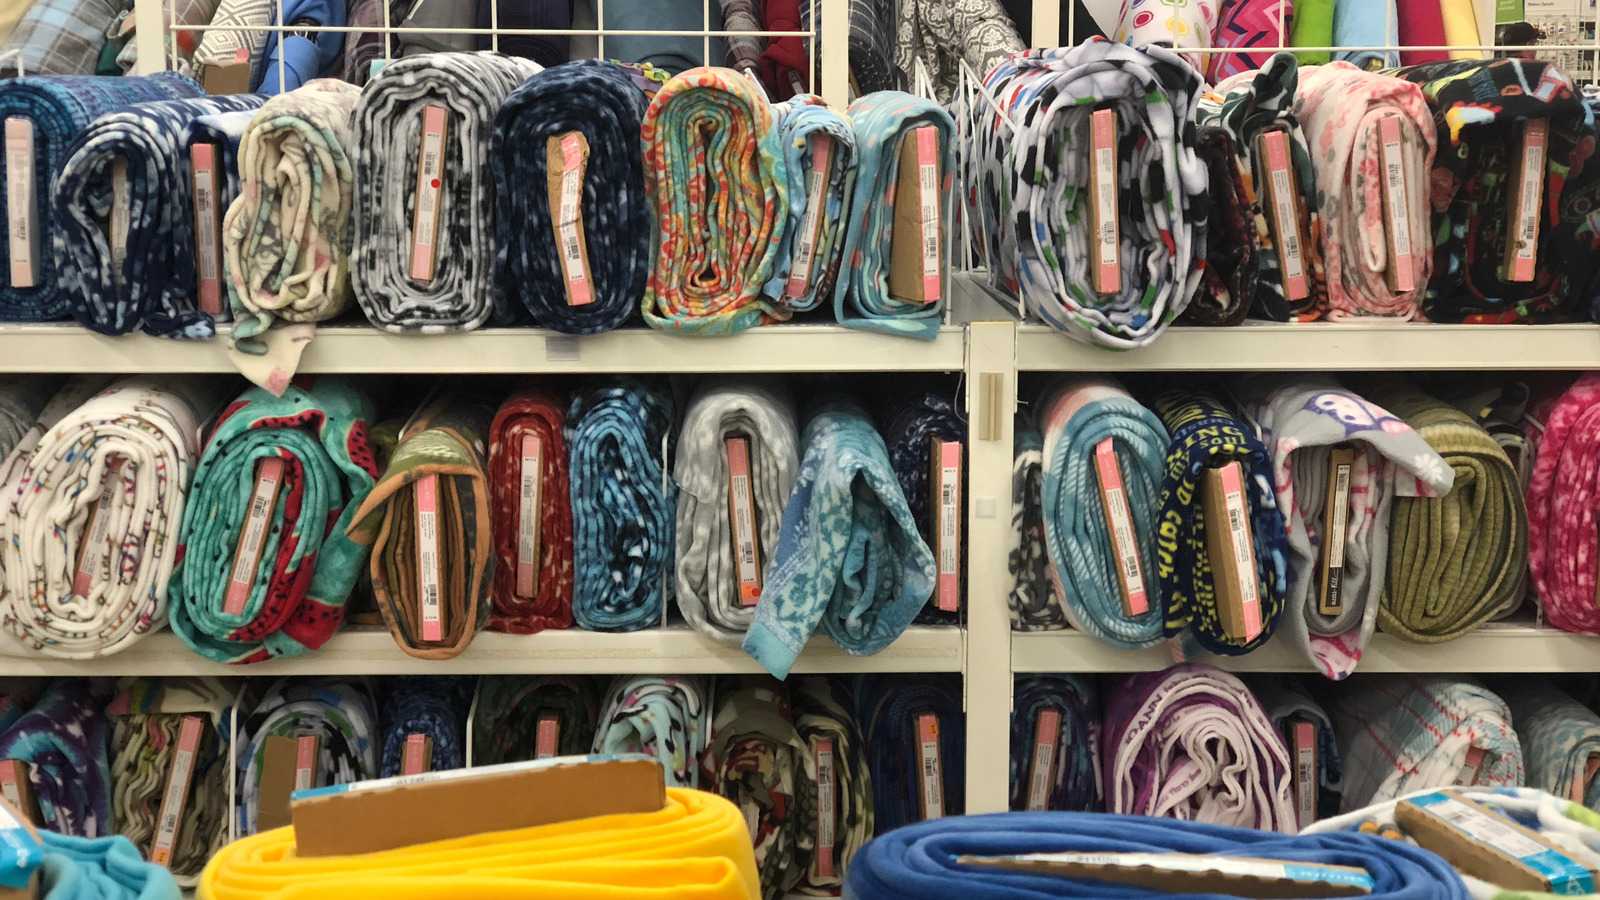 Data Shows Things Aren't Looking Bright For JoAnn Fabrics